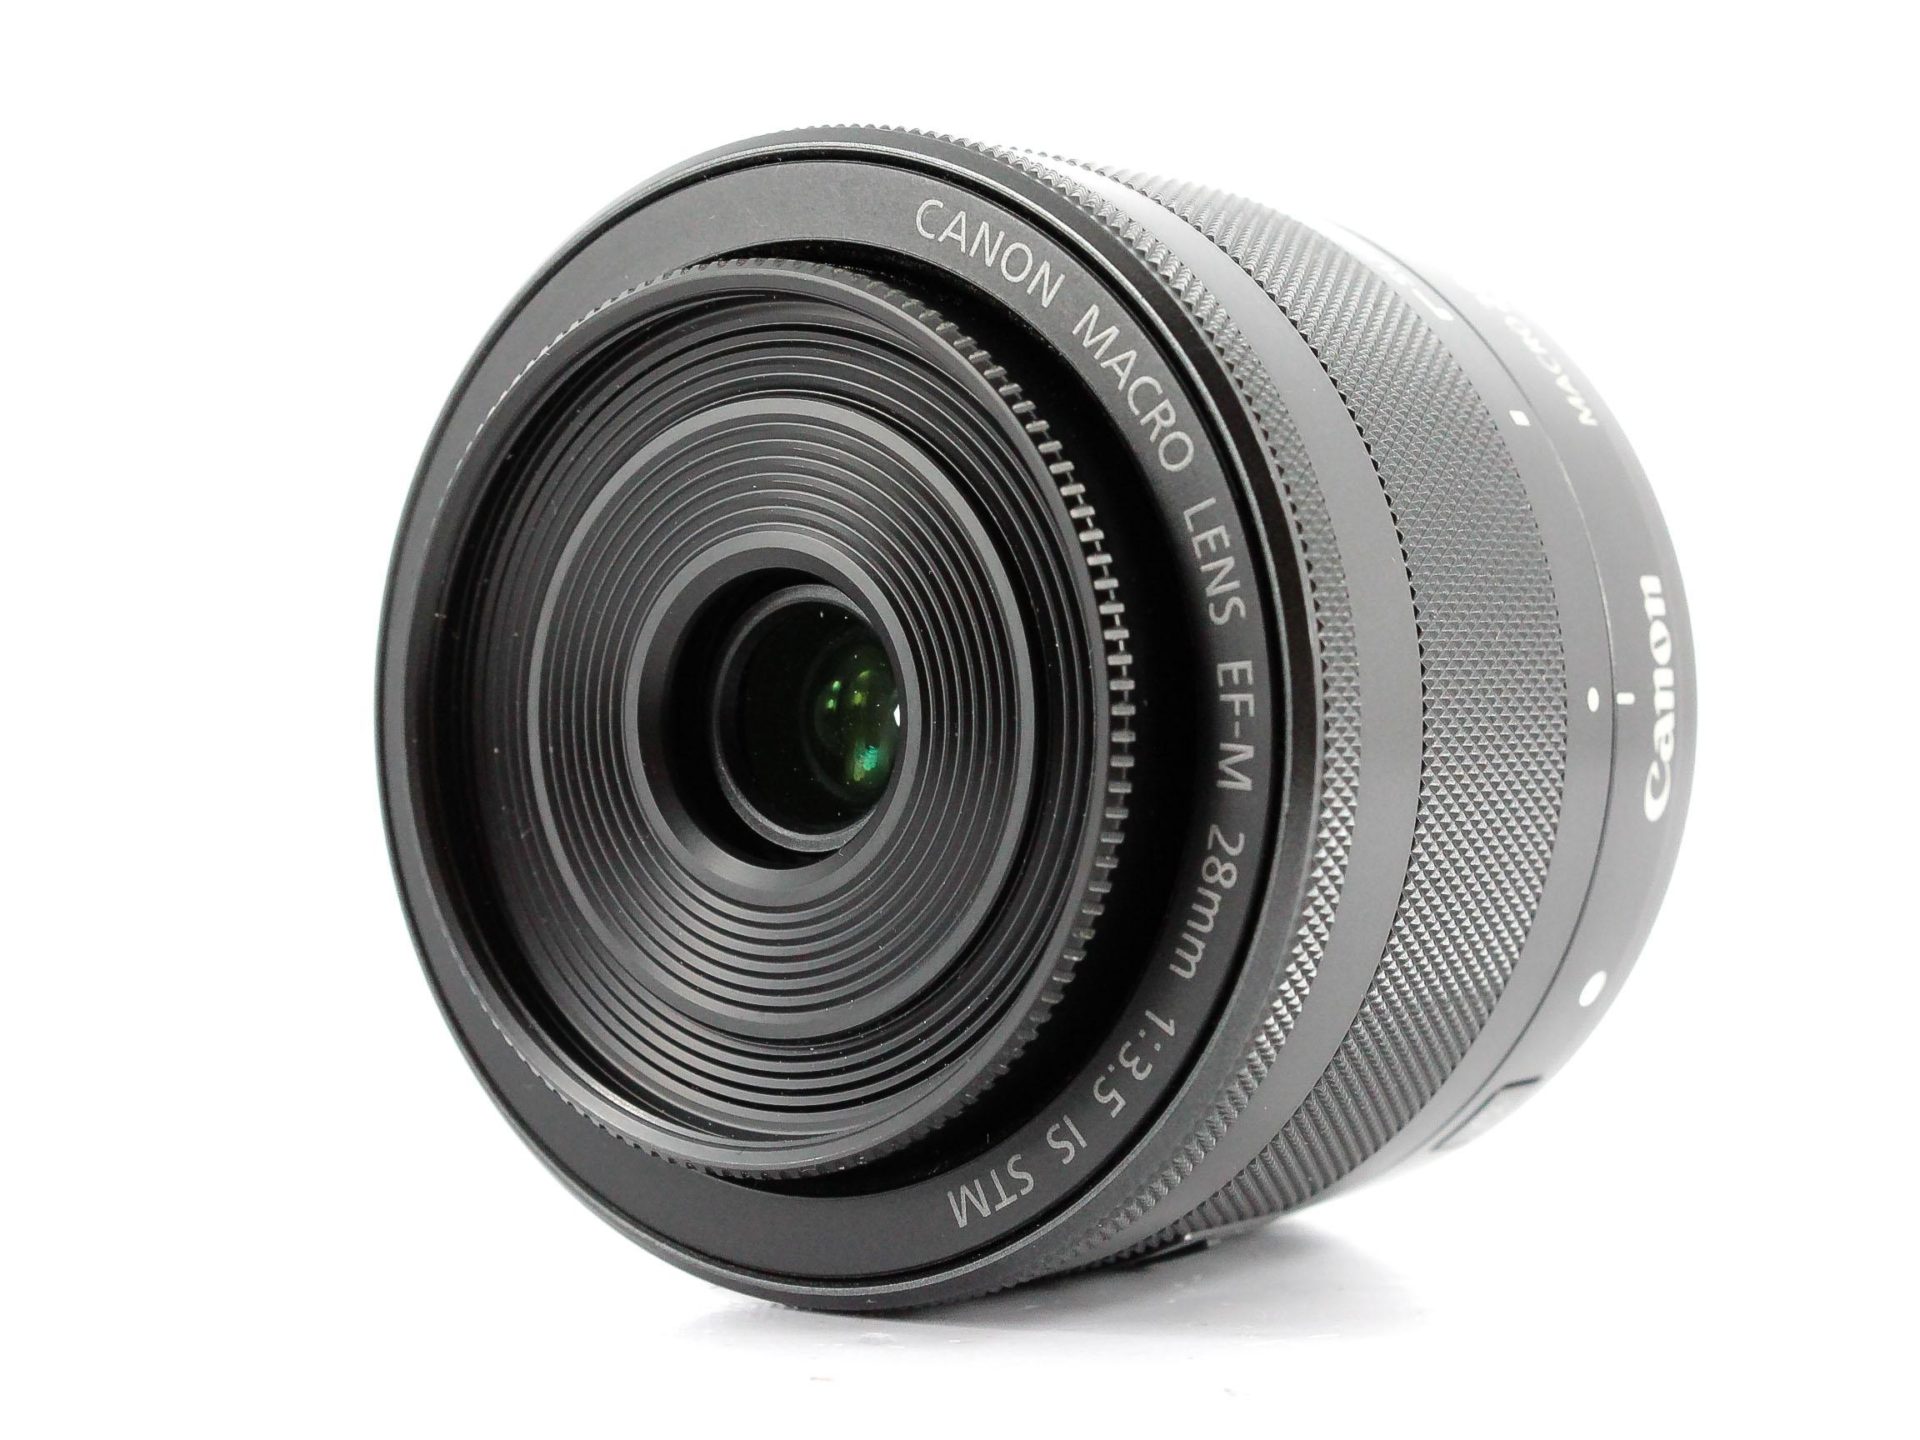 EF-M 28mm f/3.5 Macro IS STM Lens | Canon New Zealand